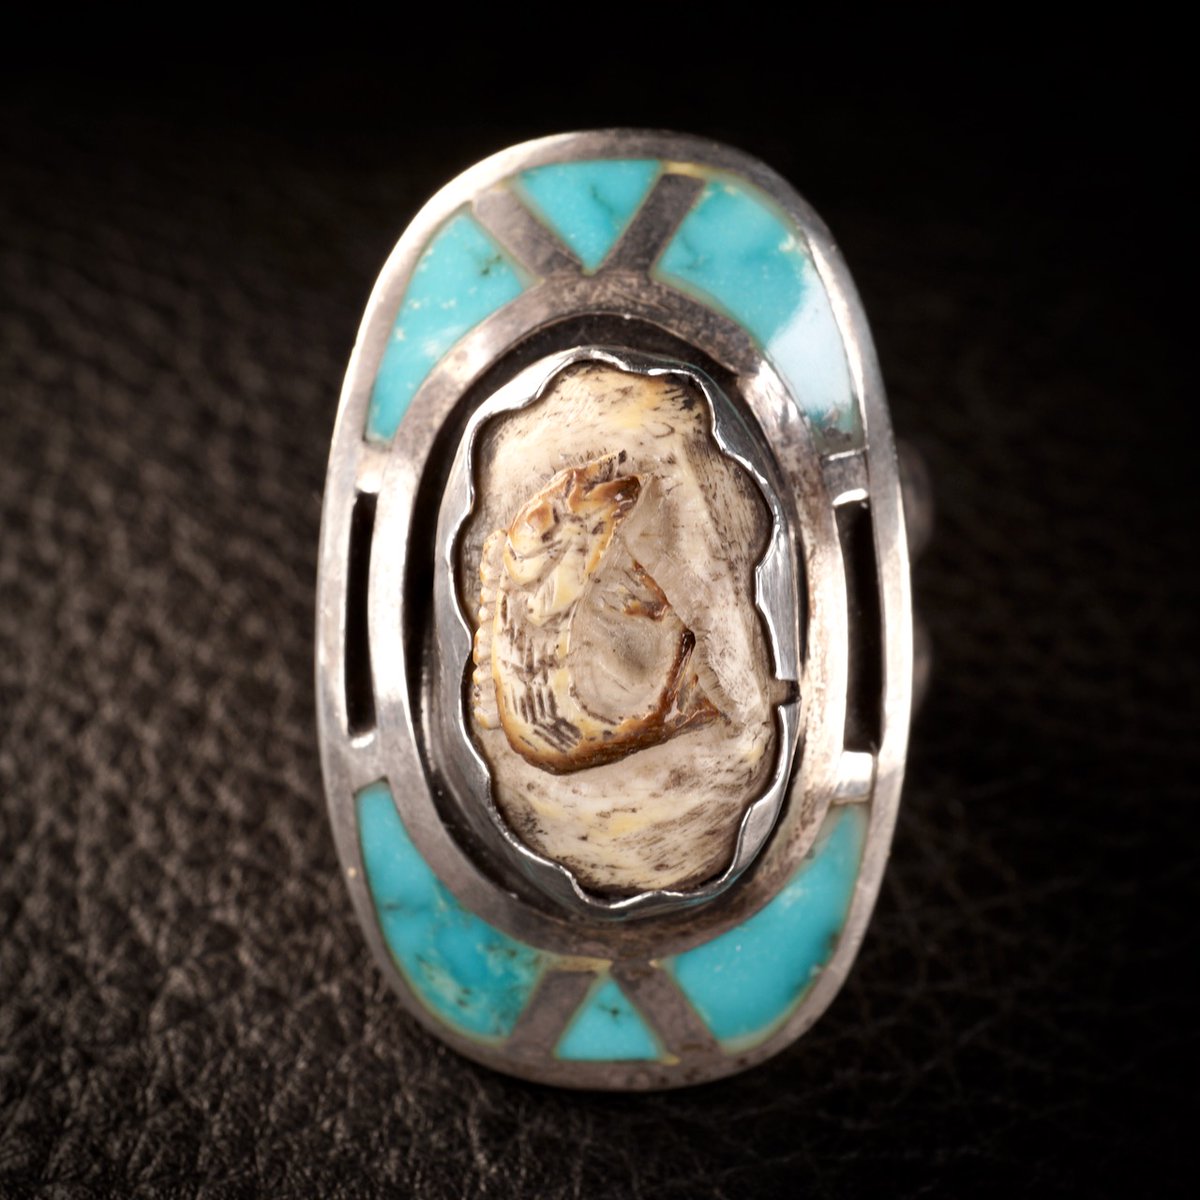 Carved Fish & Turquoise Native American Zuni Fetish Sterling Silver Ring 
farriderwest.etsy.com/listing/160861… Available at Far-Rider-West.com 
#unisexadults #turquoisering #nativeamerican #indianjewelry #vintagerings #fish #Zuni #fetish #zunifetish #western #uniquejewelry